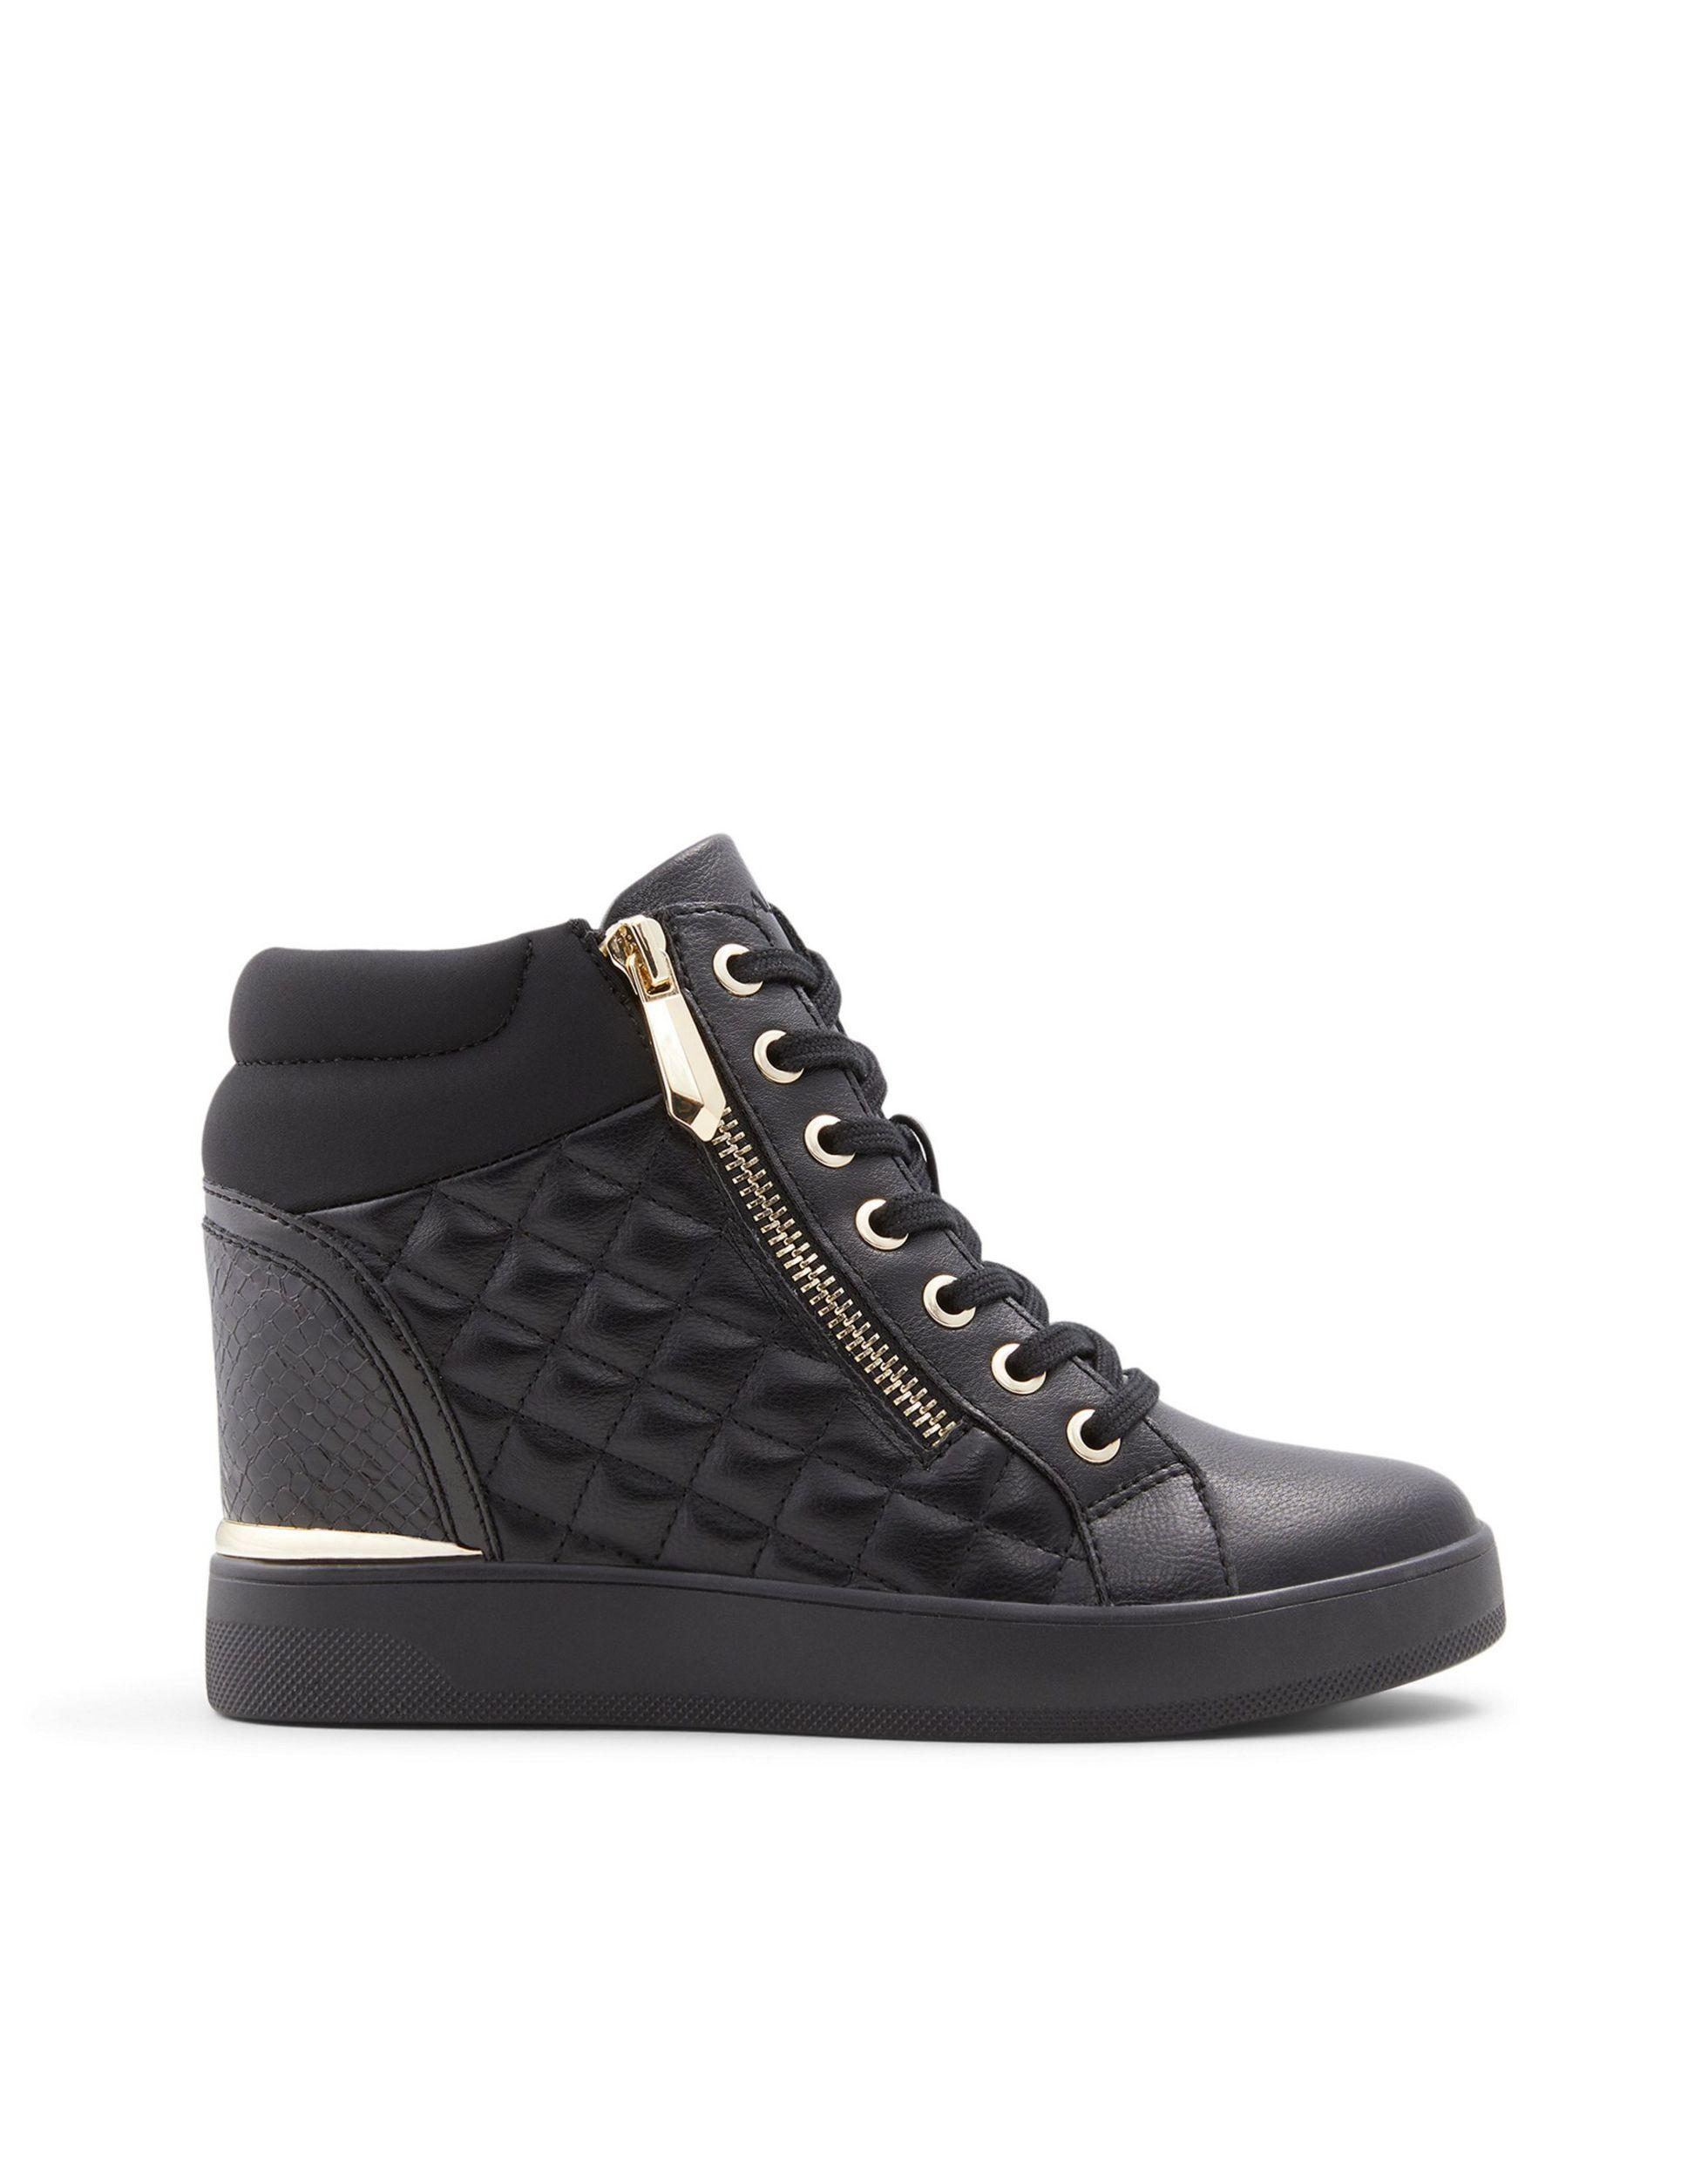 ALDO Ailanna Wedge Sneakers With Faux Fur Lining in Black | Lyst